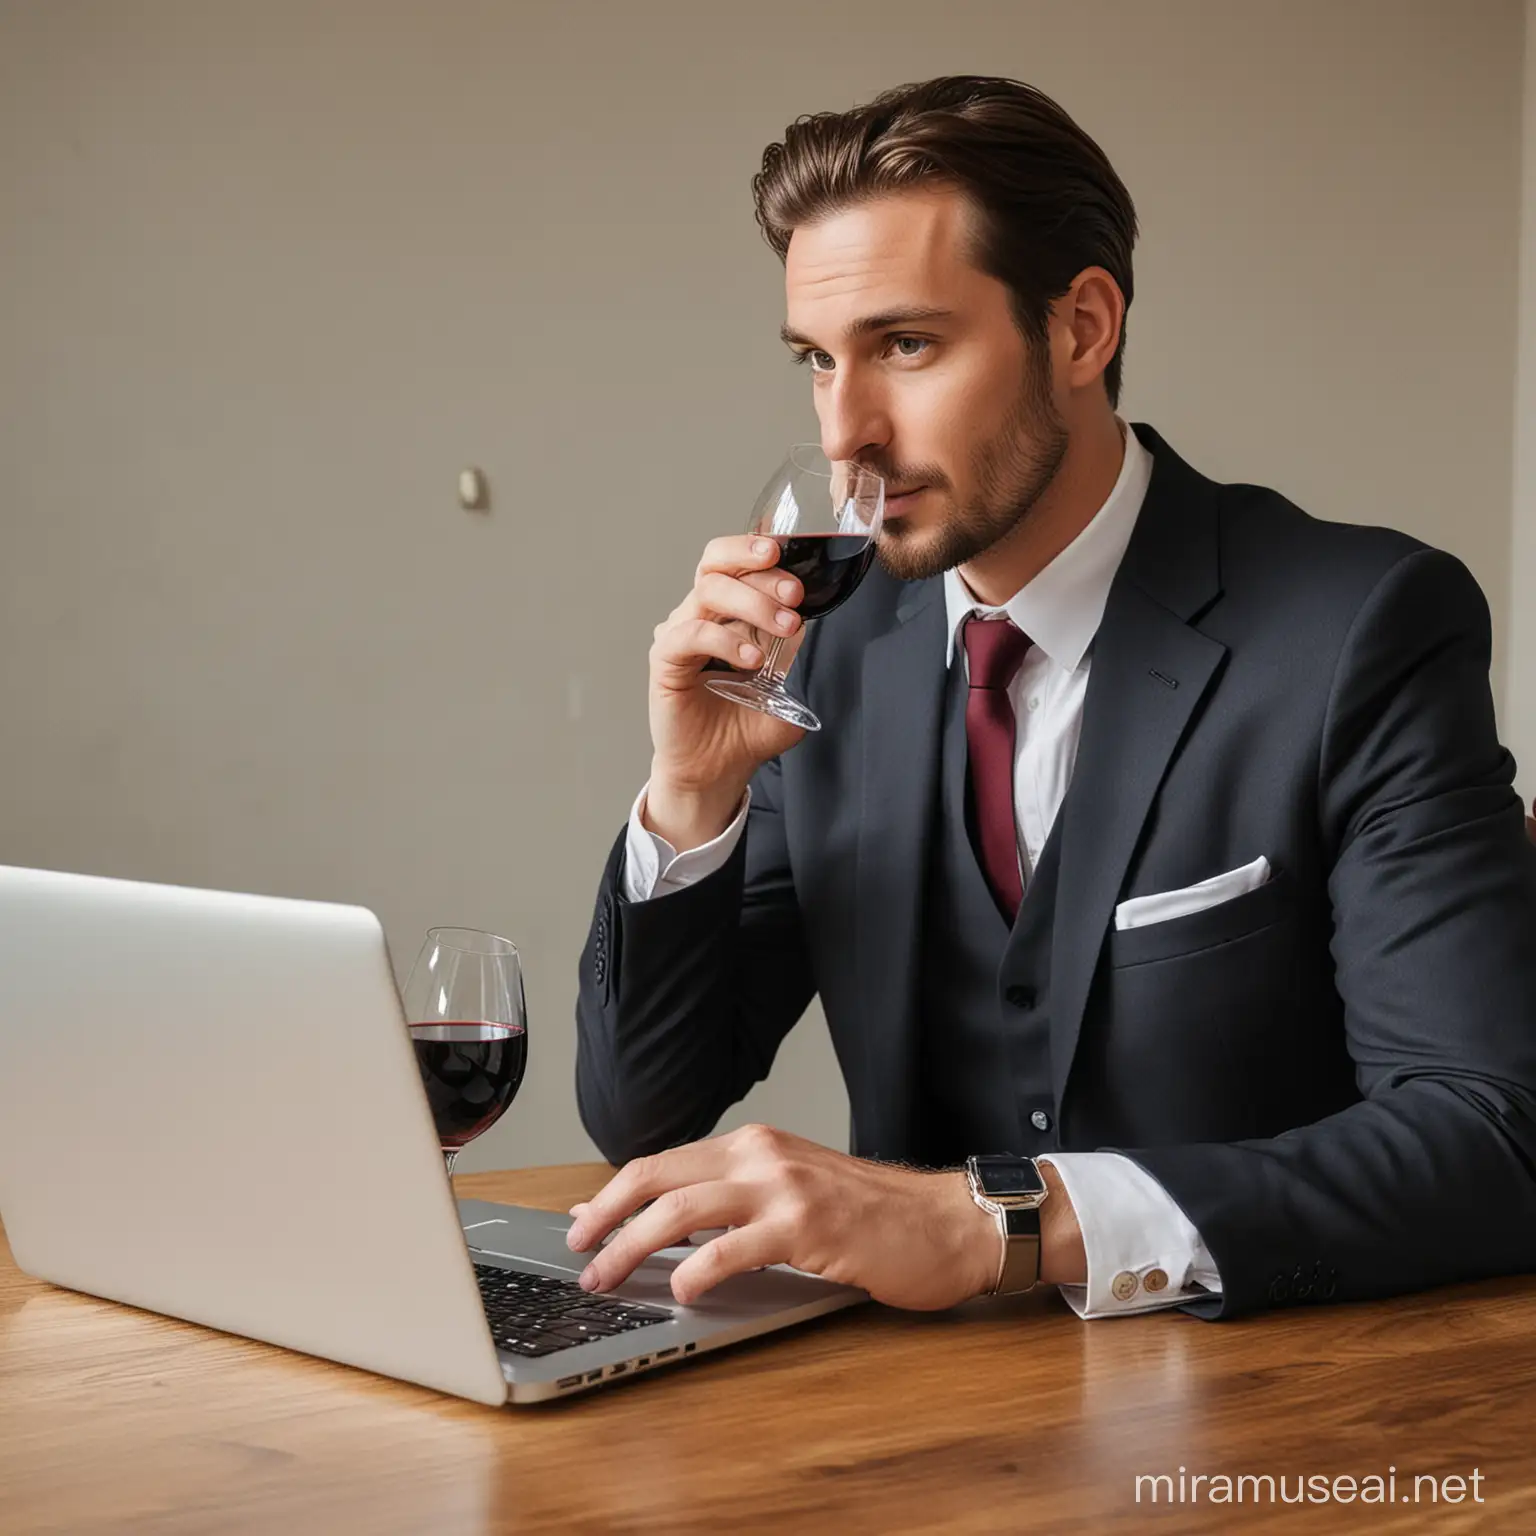 A man in a suit drinking wine in front of a table with a laptop on it